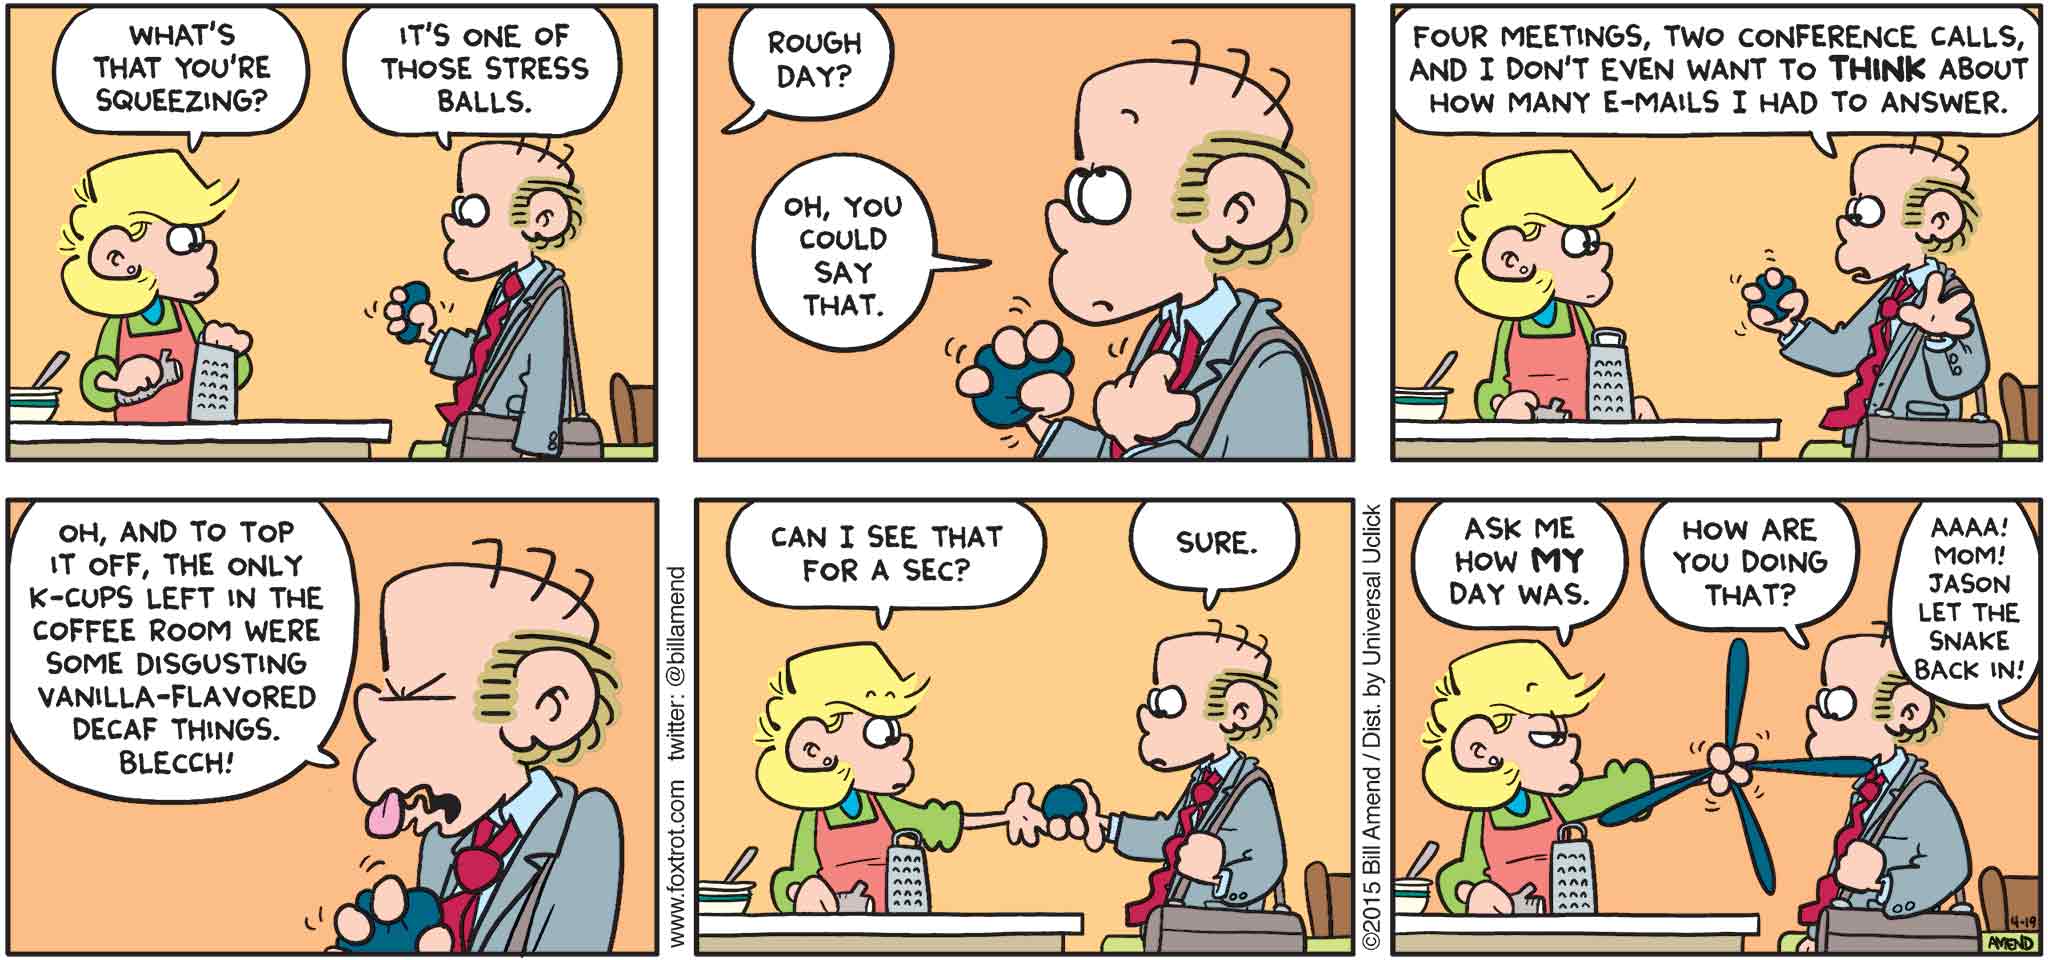 FoxTrot by Bill Amend - "Squeezy Peezy" published April 19, 2015 - Andy: What's that you're squeezing? Roger: It's one of those stress balls. Andy: Rough day? Roger: Oh, you could say that. Four meetings, two conference calls, and I don't even want to THINK about how many e-mails I had to answer. Oh, and to top it off, the only k-cups left in the coffee room were some disgusting vanilla-flavored decaf things. Blecch! Andy: Can I see that for a sec? Roger: Sure. Andy: Ask me how MY day was. Roger: How are you doing that? Kid: AAAA! Mom! Jason let the snake back in!